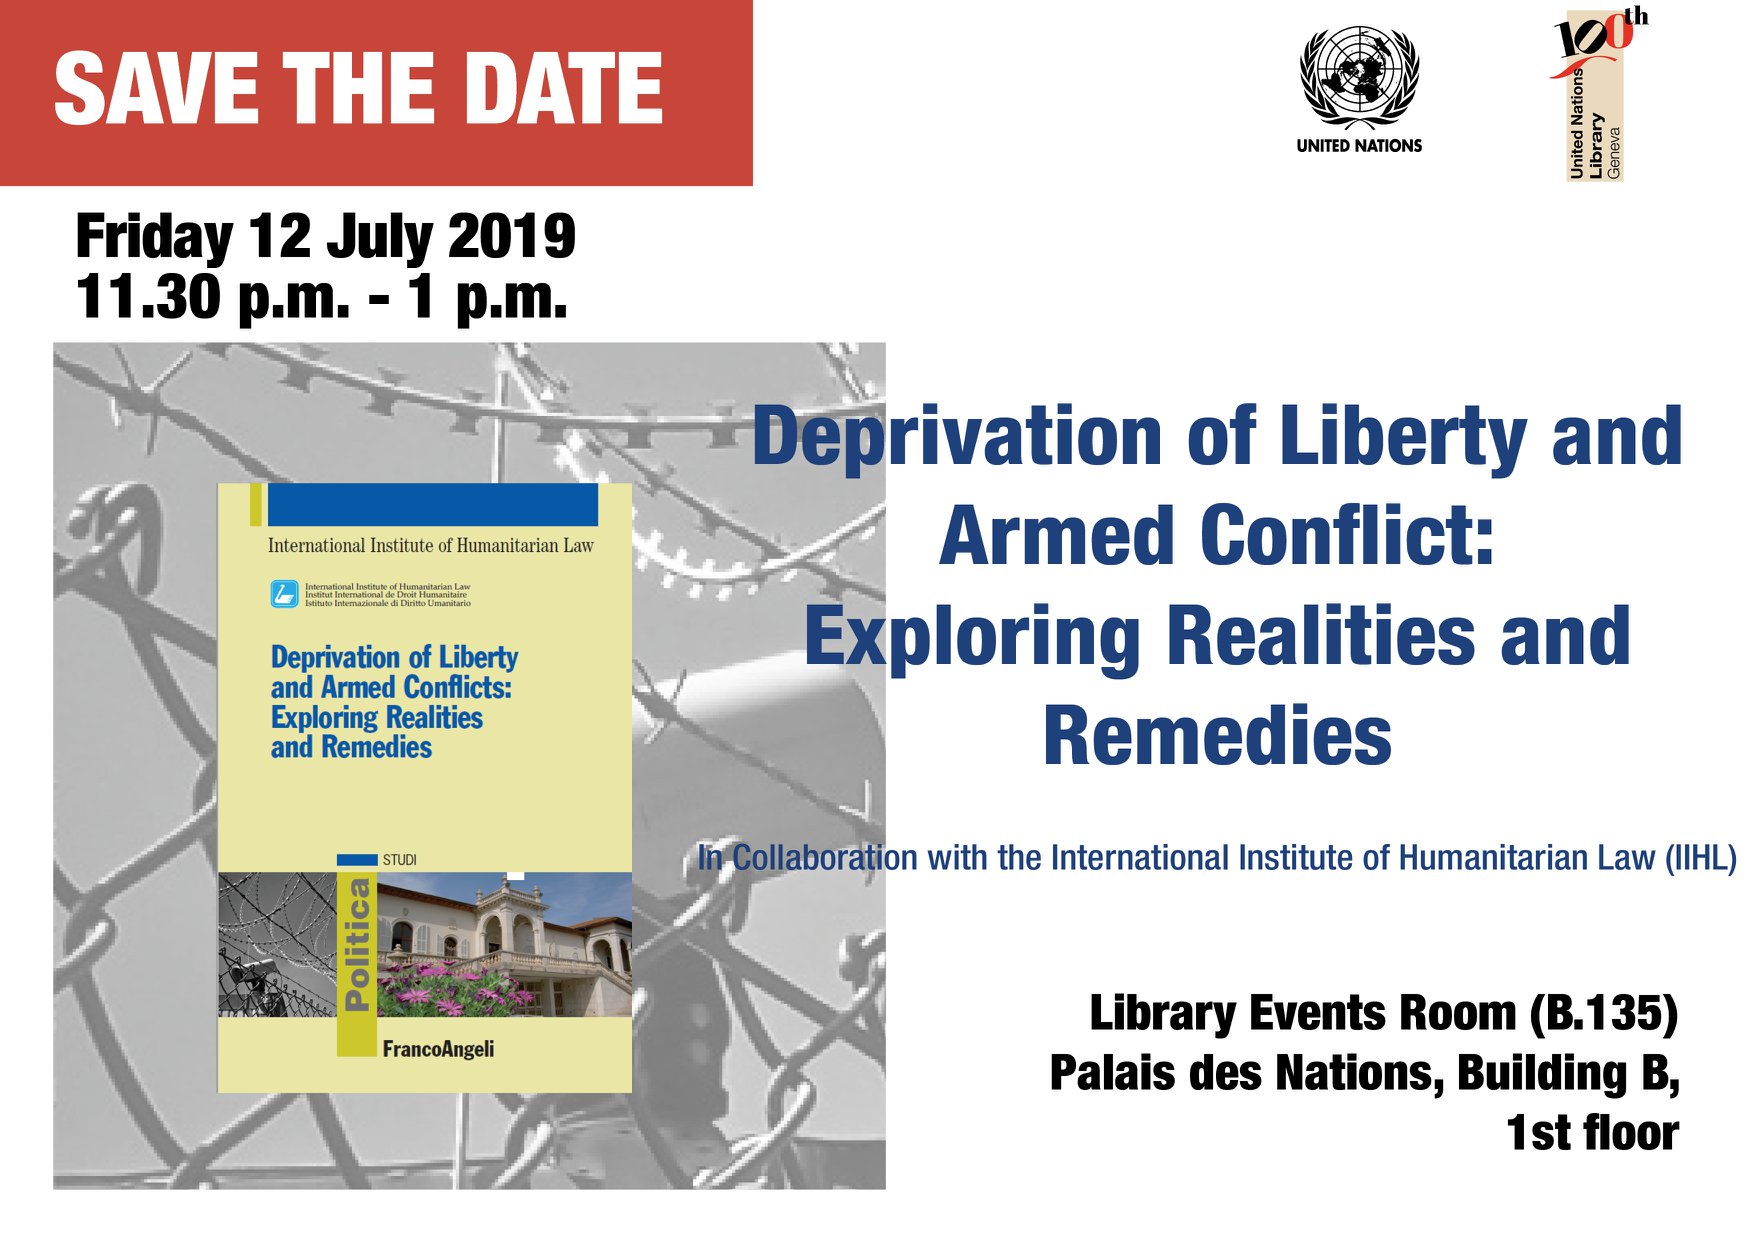 Book launch @ UN Library in Geneva “Deprivation of liberty and armed conflict: exploring realities and remedies”